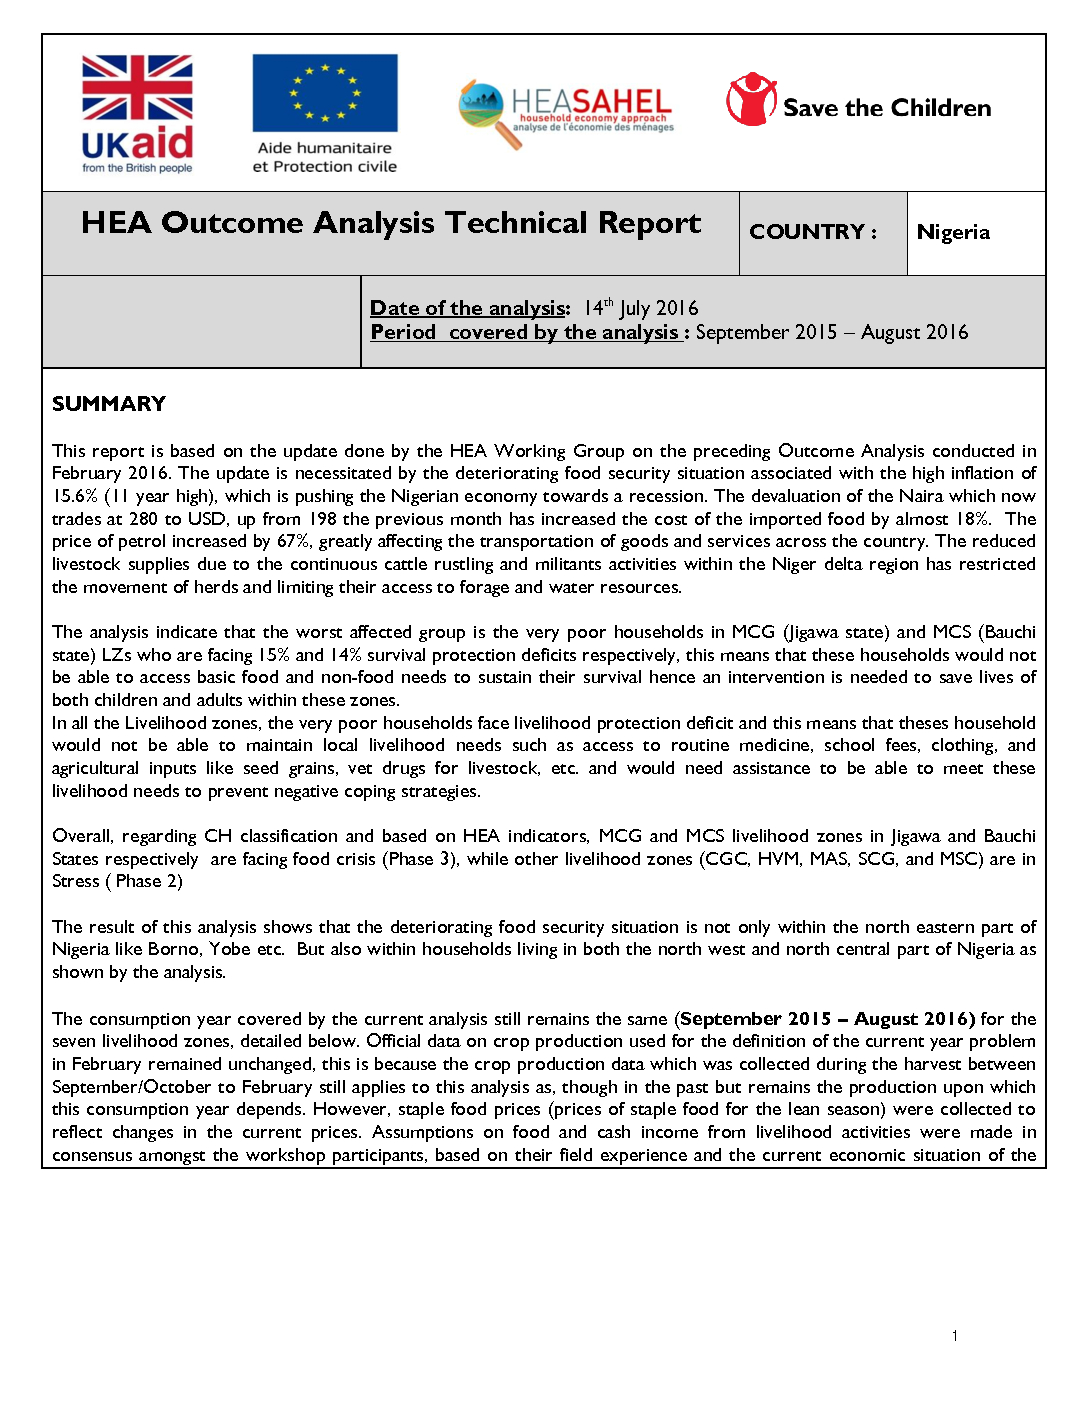 Outcome Analysis Report Update - Nigeria - March 2016